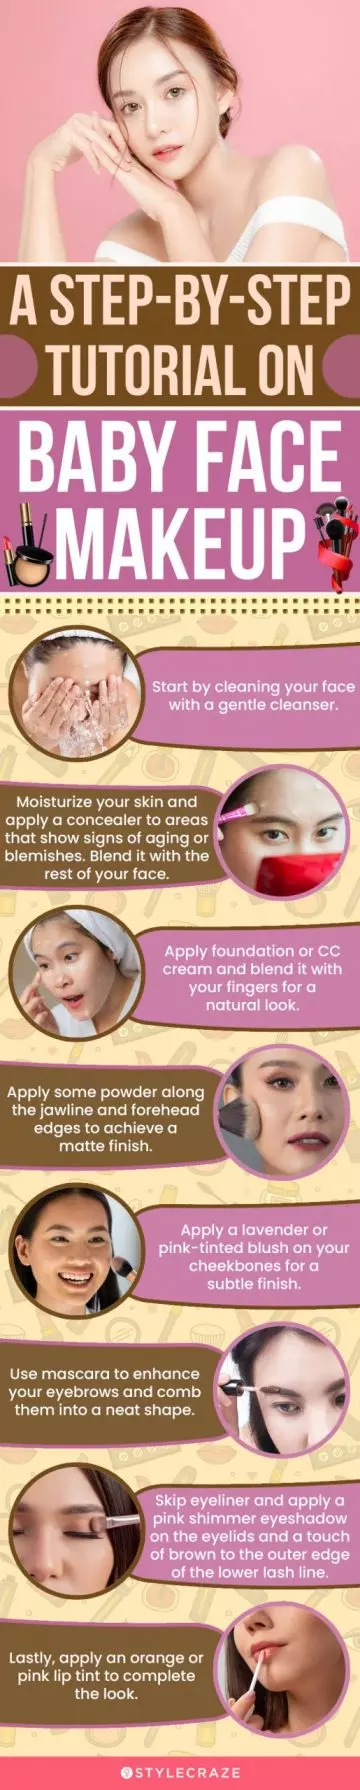 a step by step tutorial on baby face makeup (infographic)